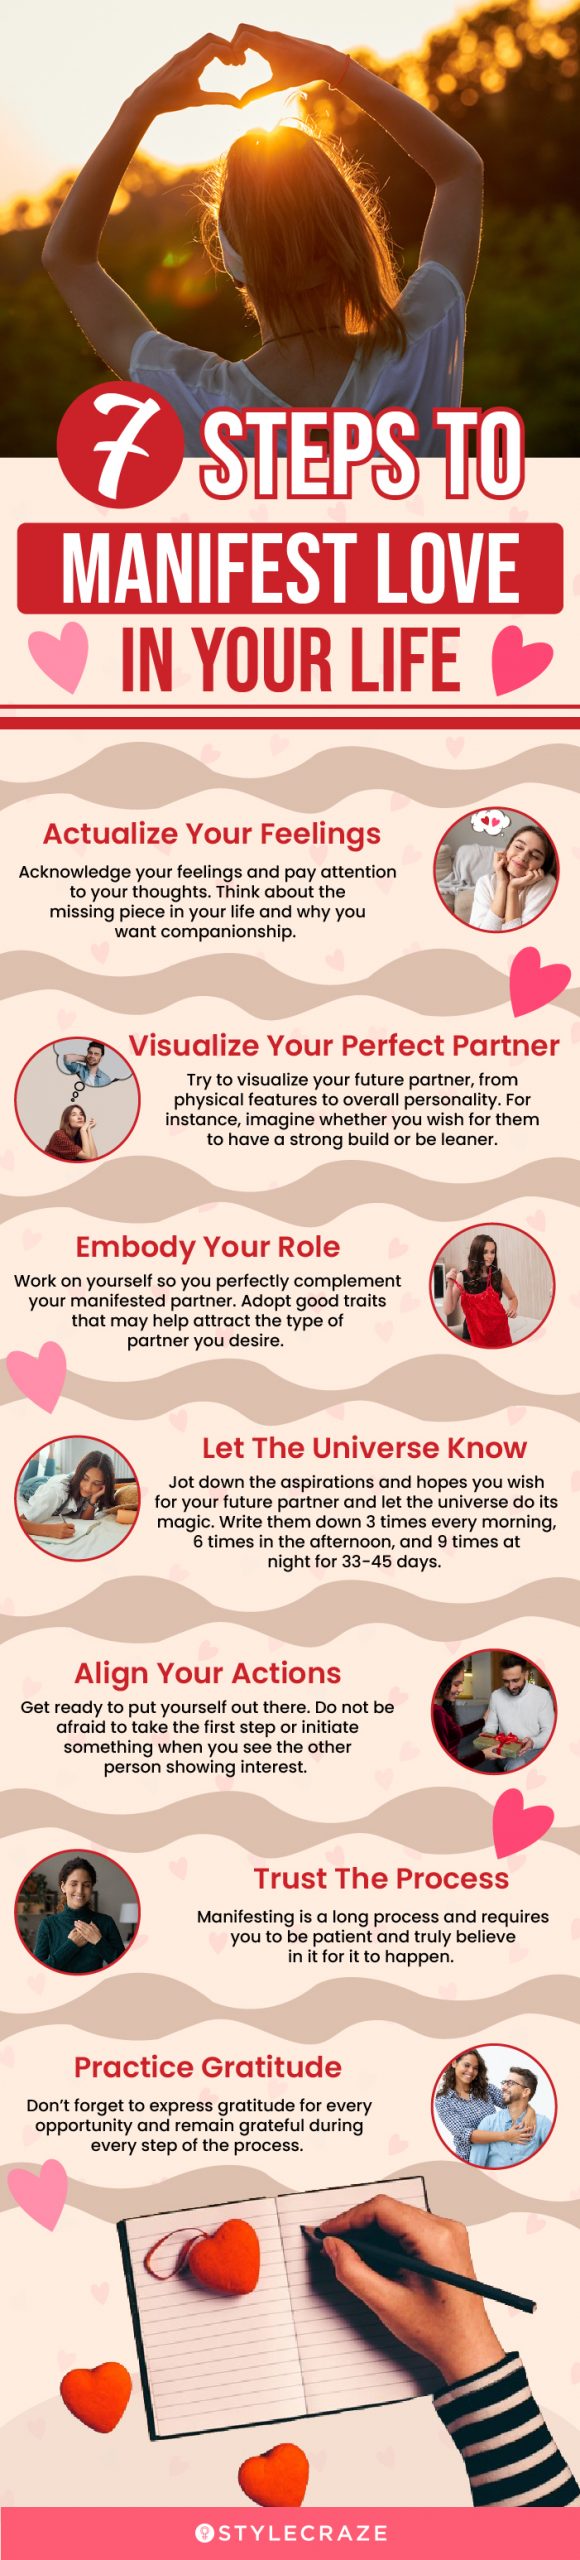 7 steps to manifest love in your life (infographic)